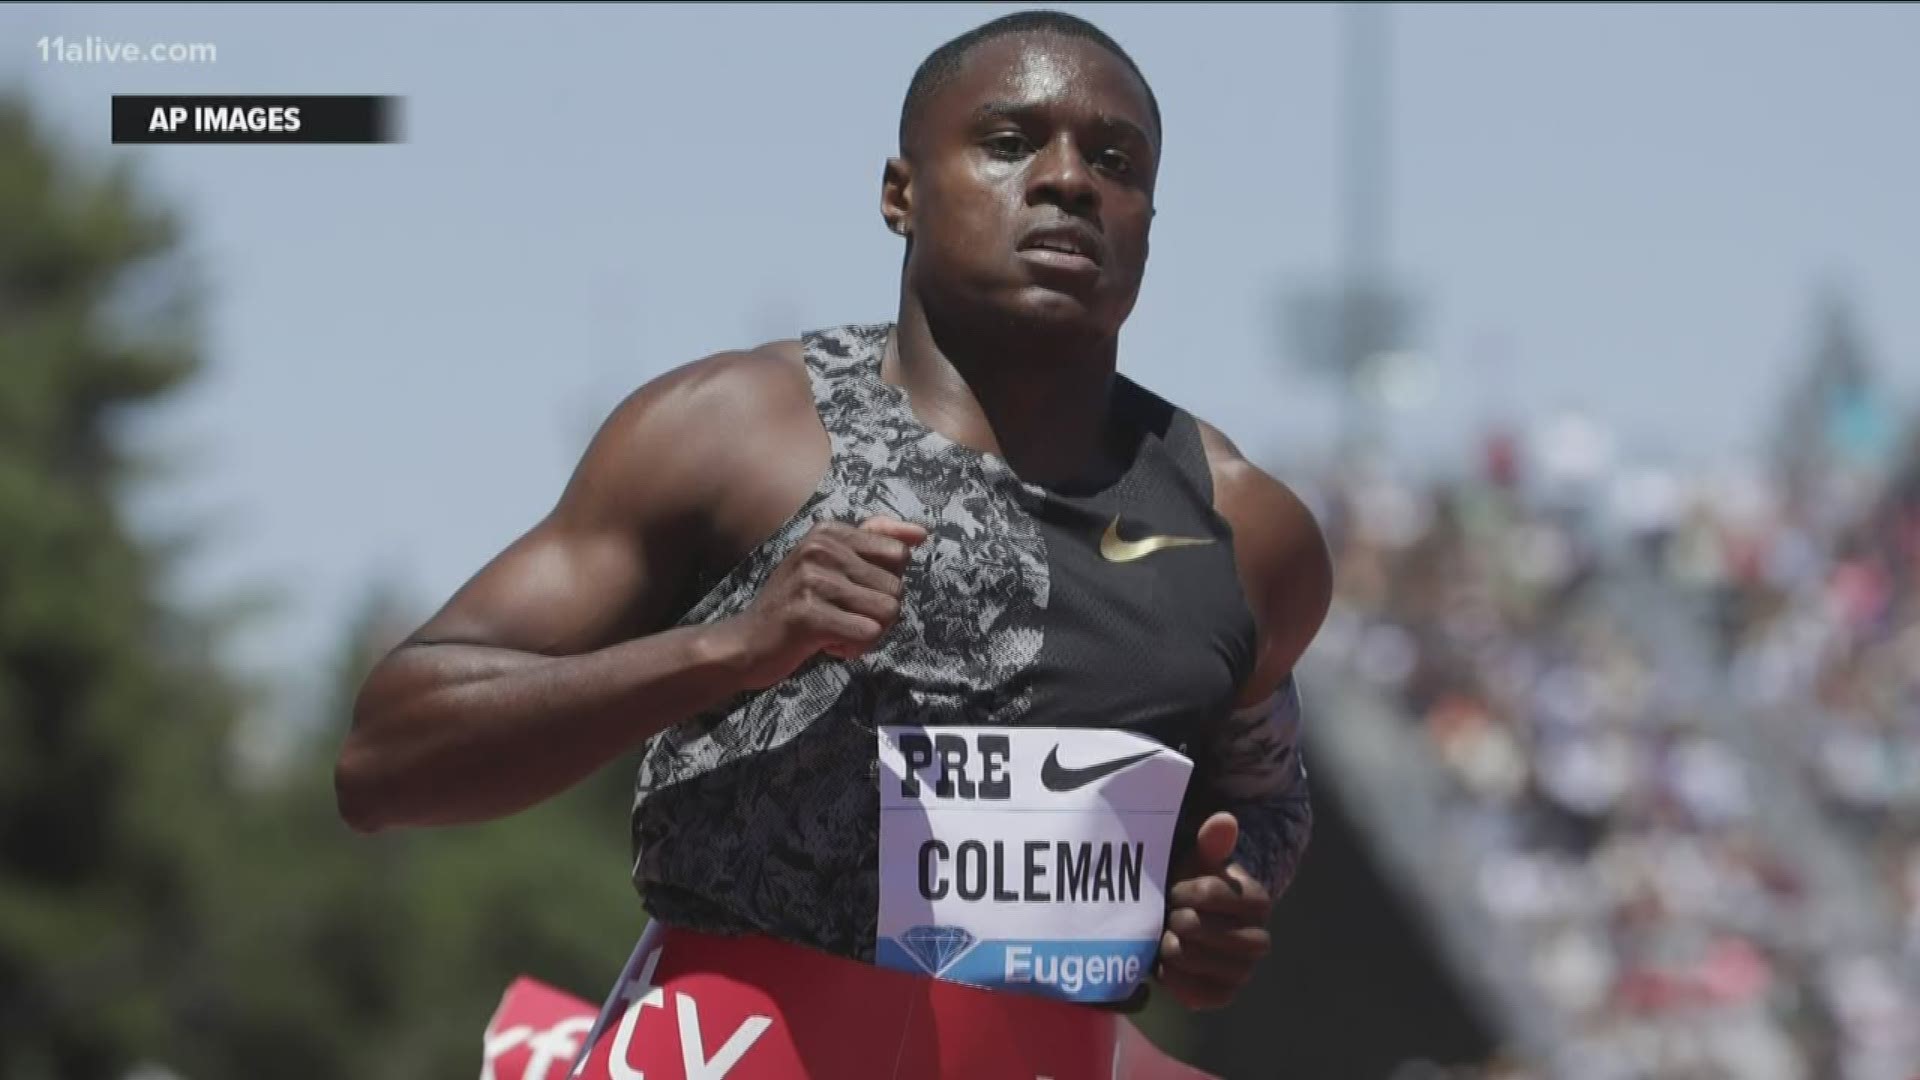 Coleman is the reigning U.S. champion and a favorite in the 100 meters, a distance at which he holds the world-leading time over the past three years.